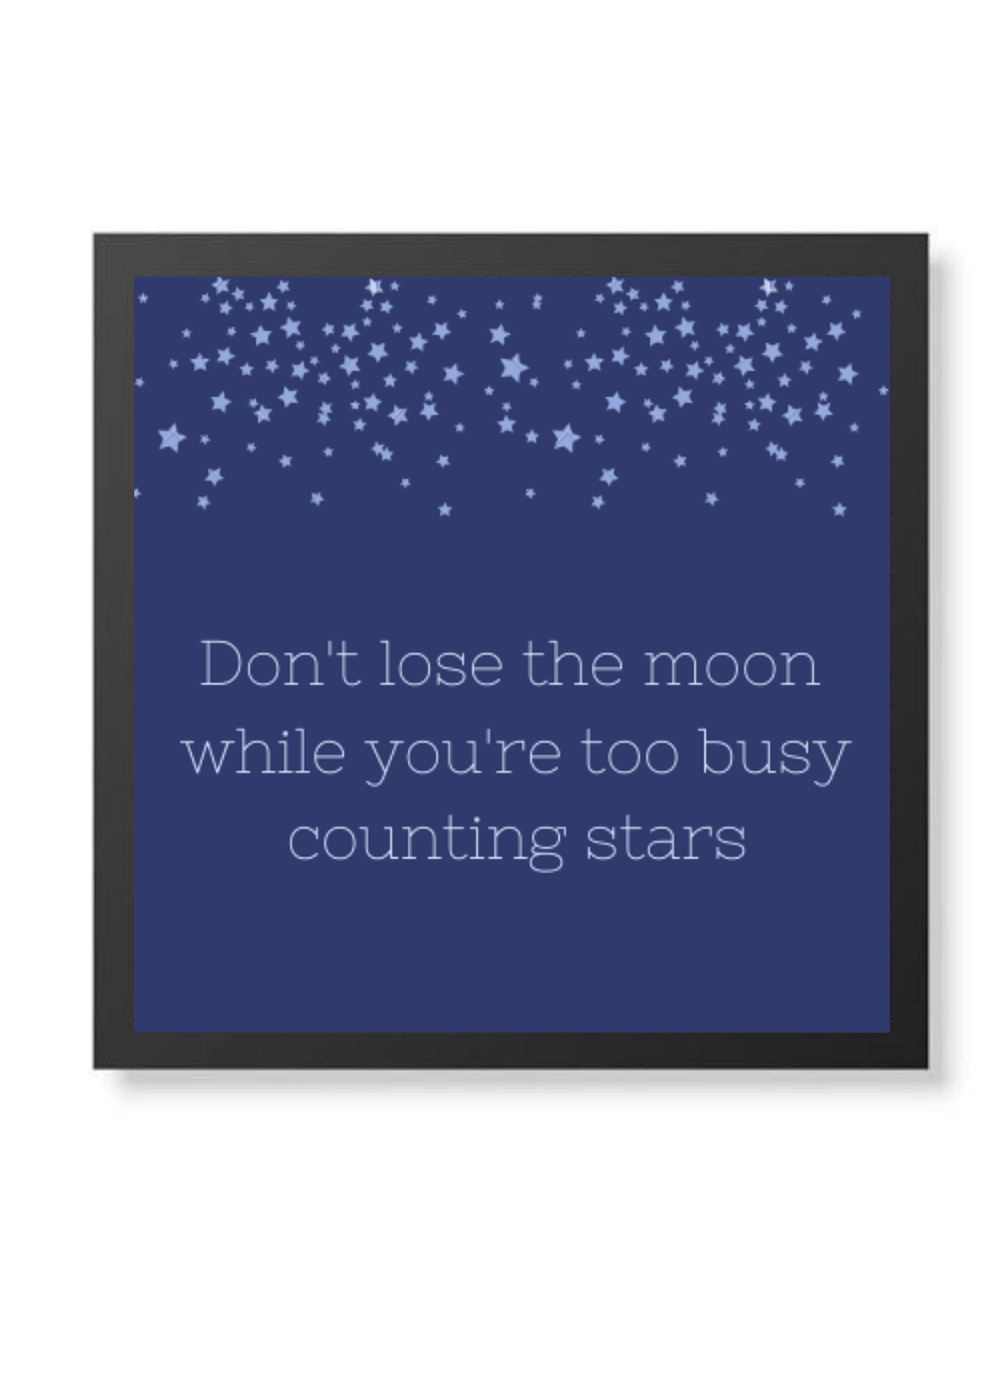 "Don't lose the moon" Framed Wall Decor